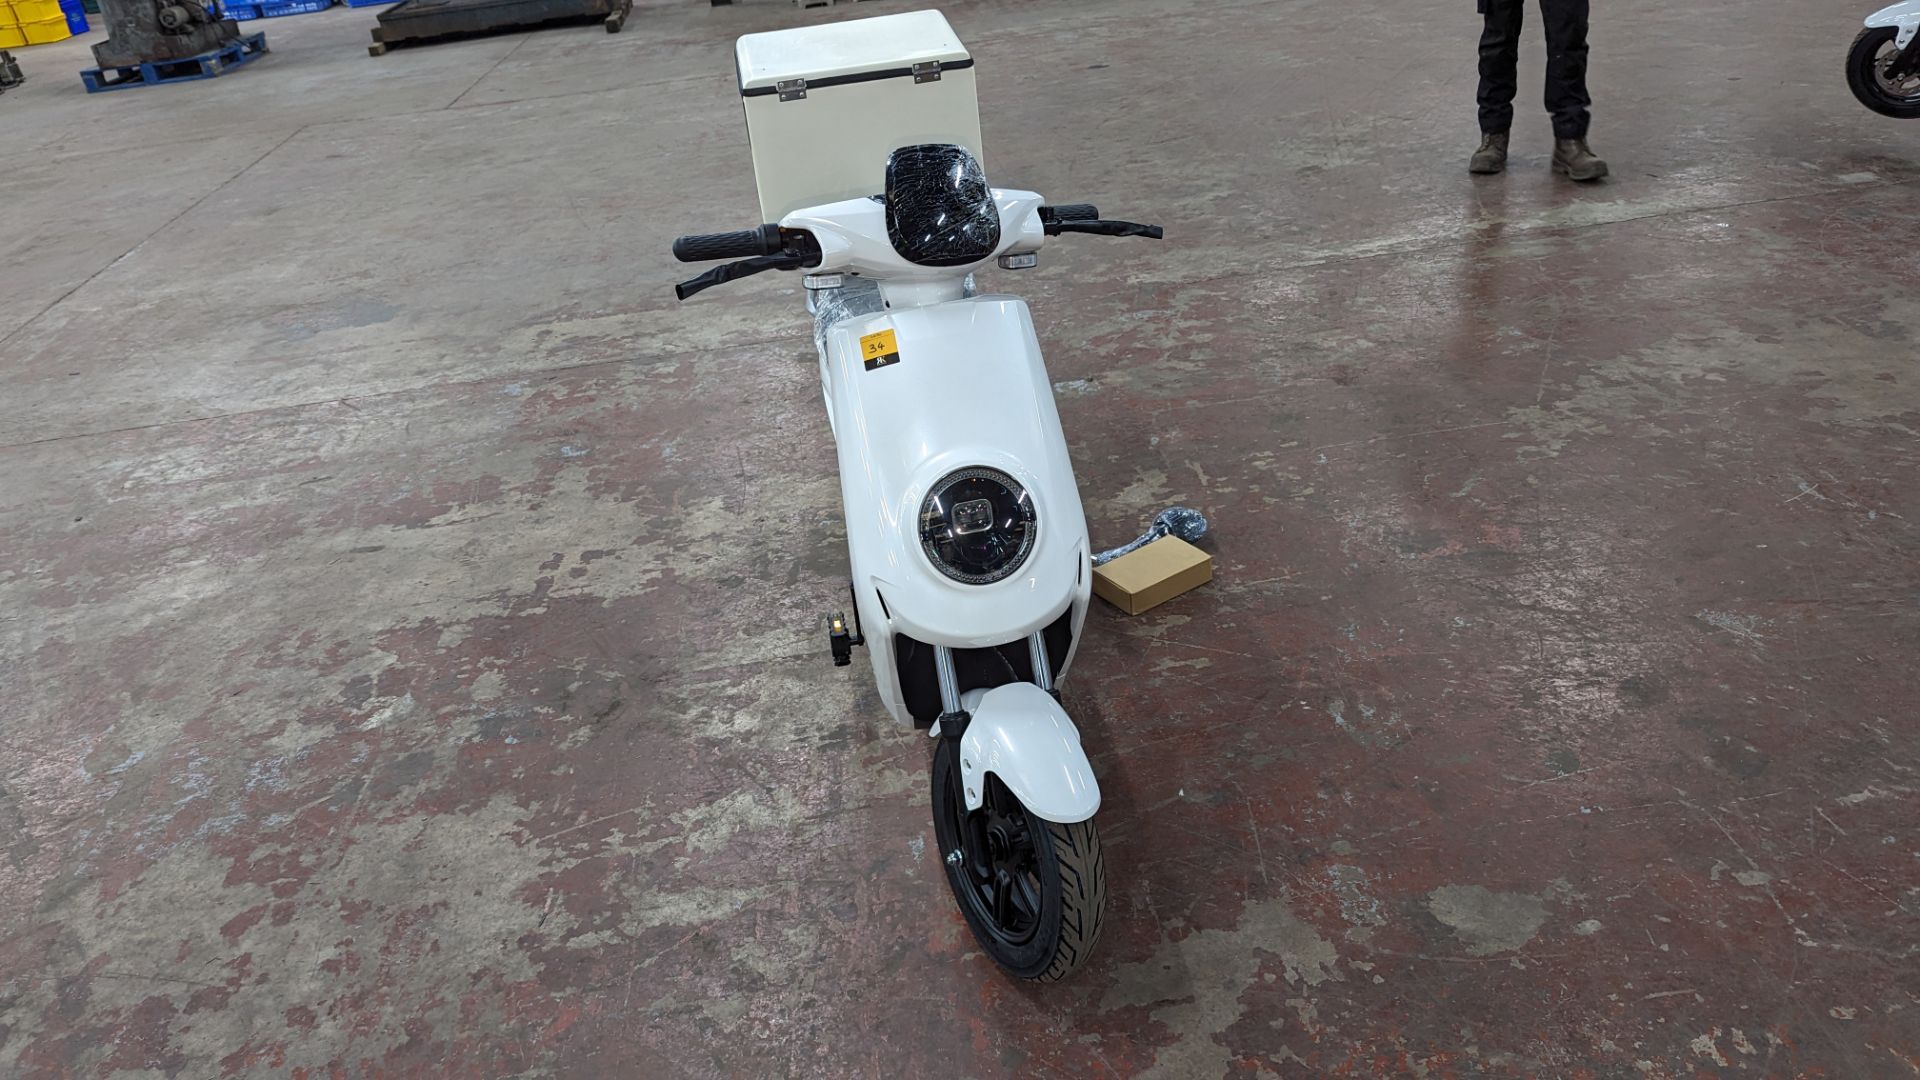 Model 18 Electric Bike: Zero (0) recorded miles, white body with black detailing, insulated box moun - Image 7 of 13